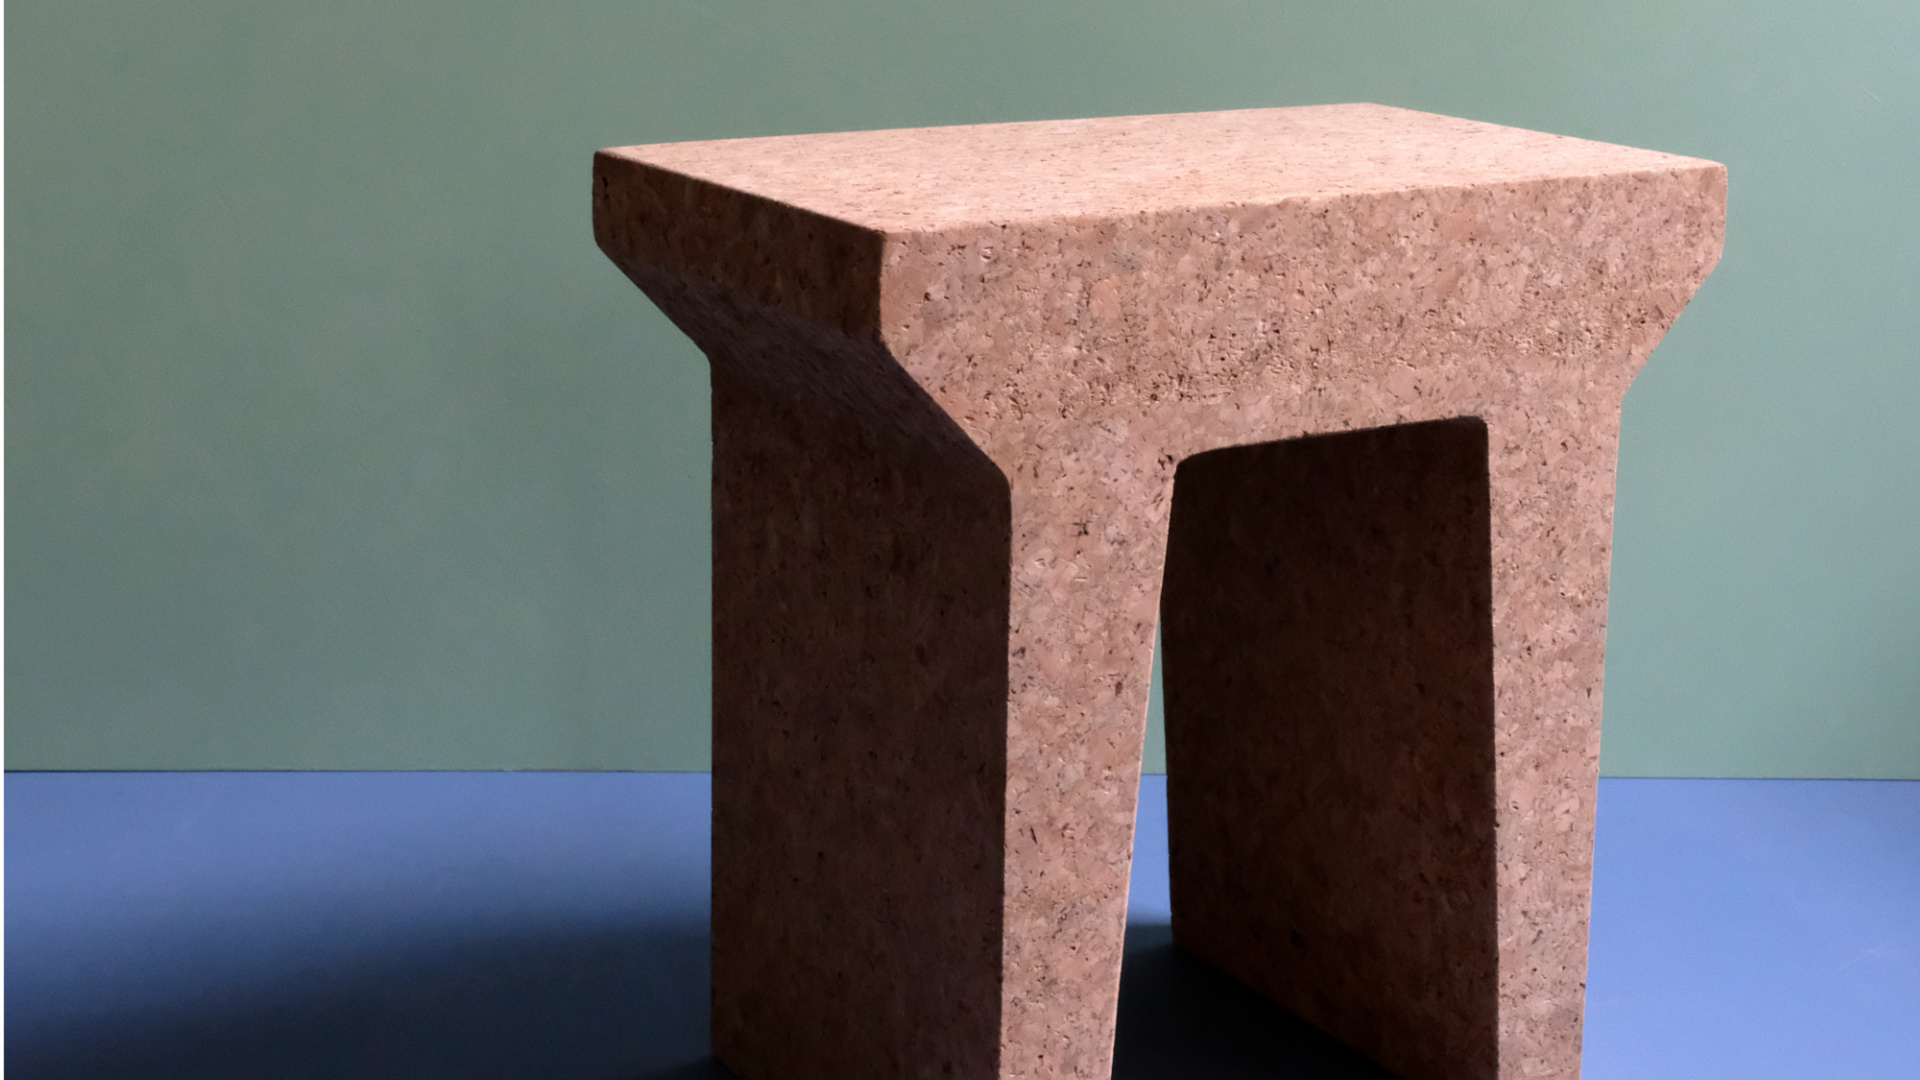 Stool from The Home Project Design Studio